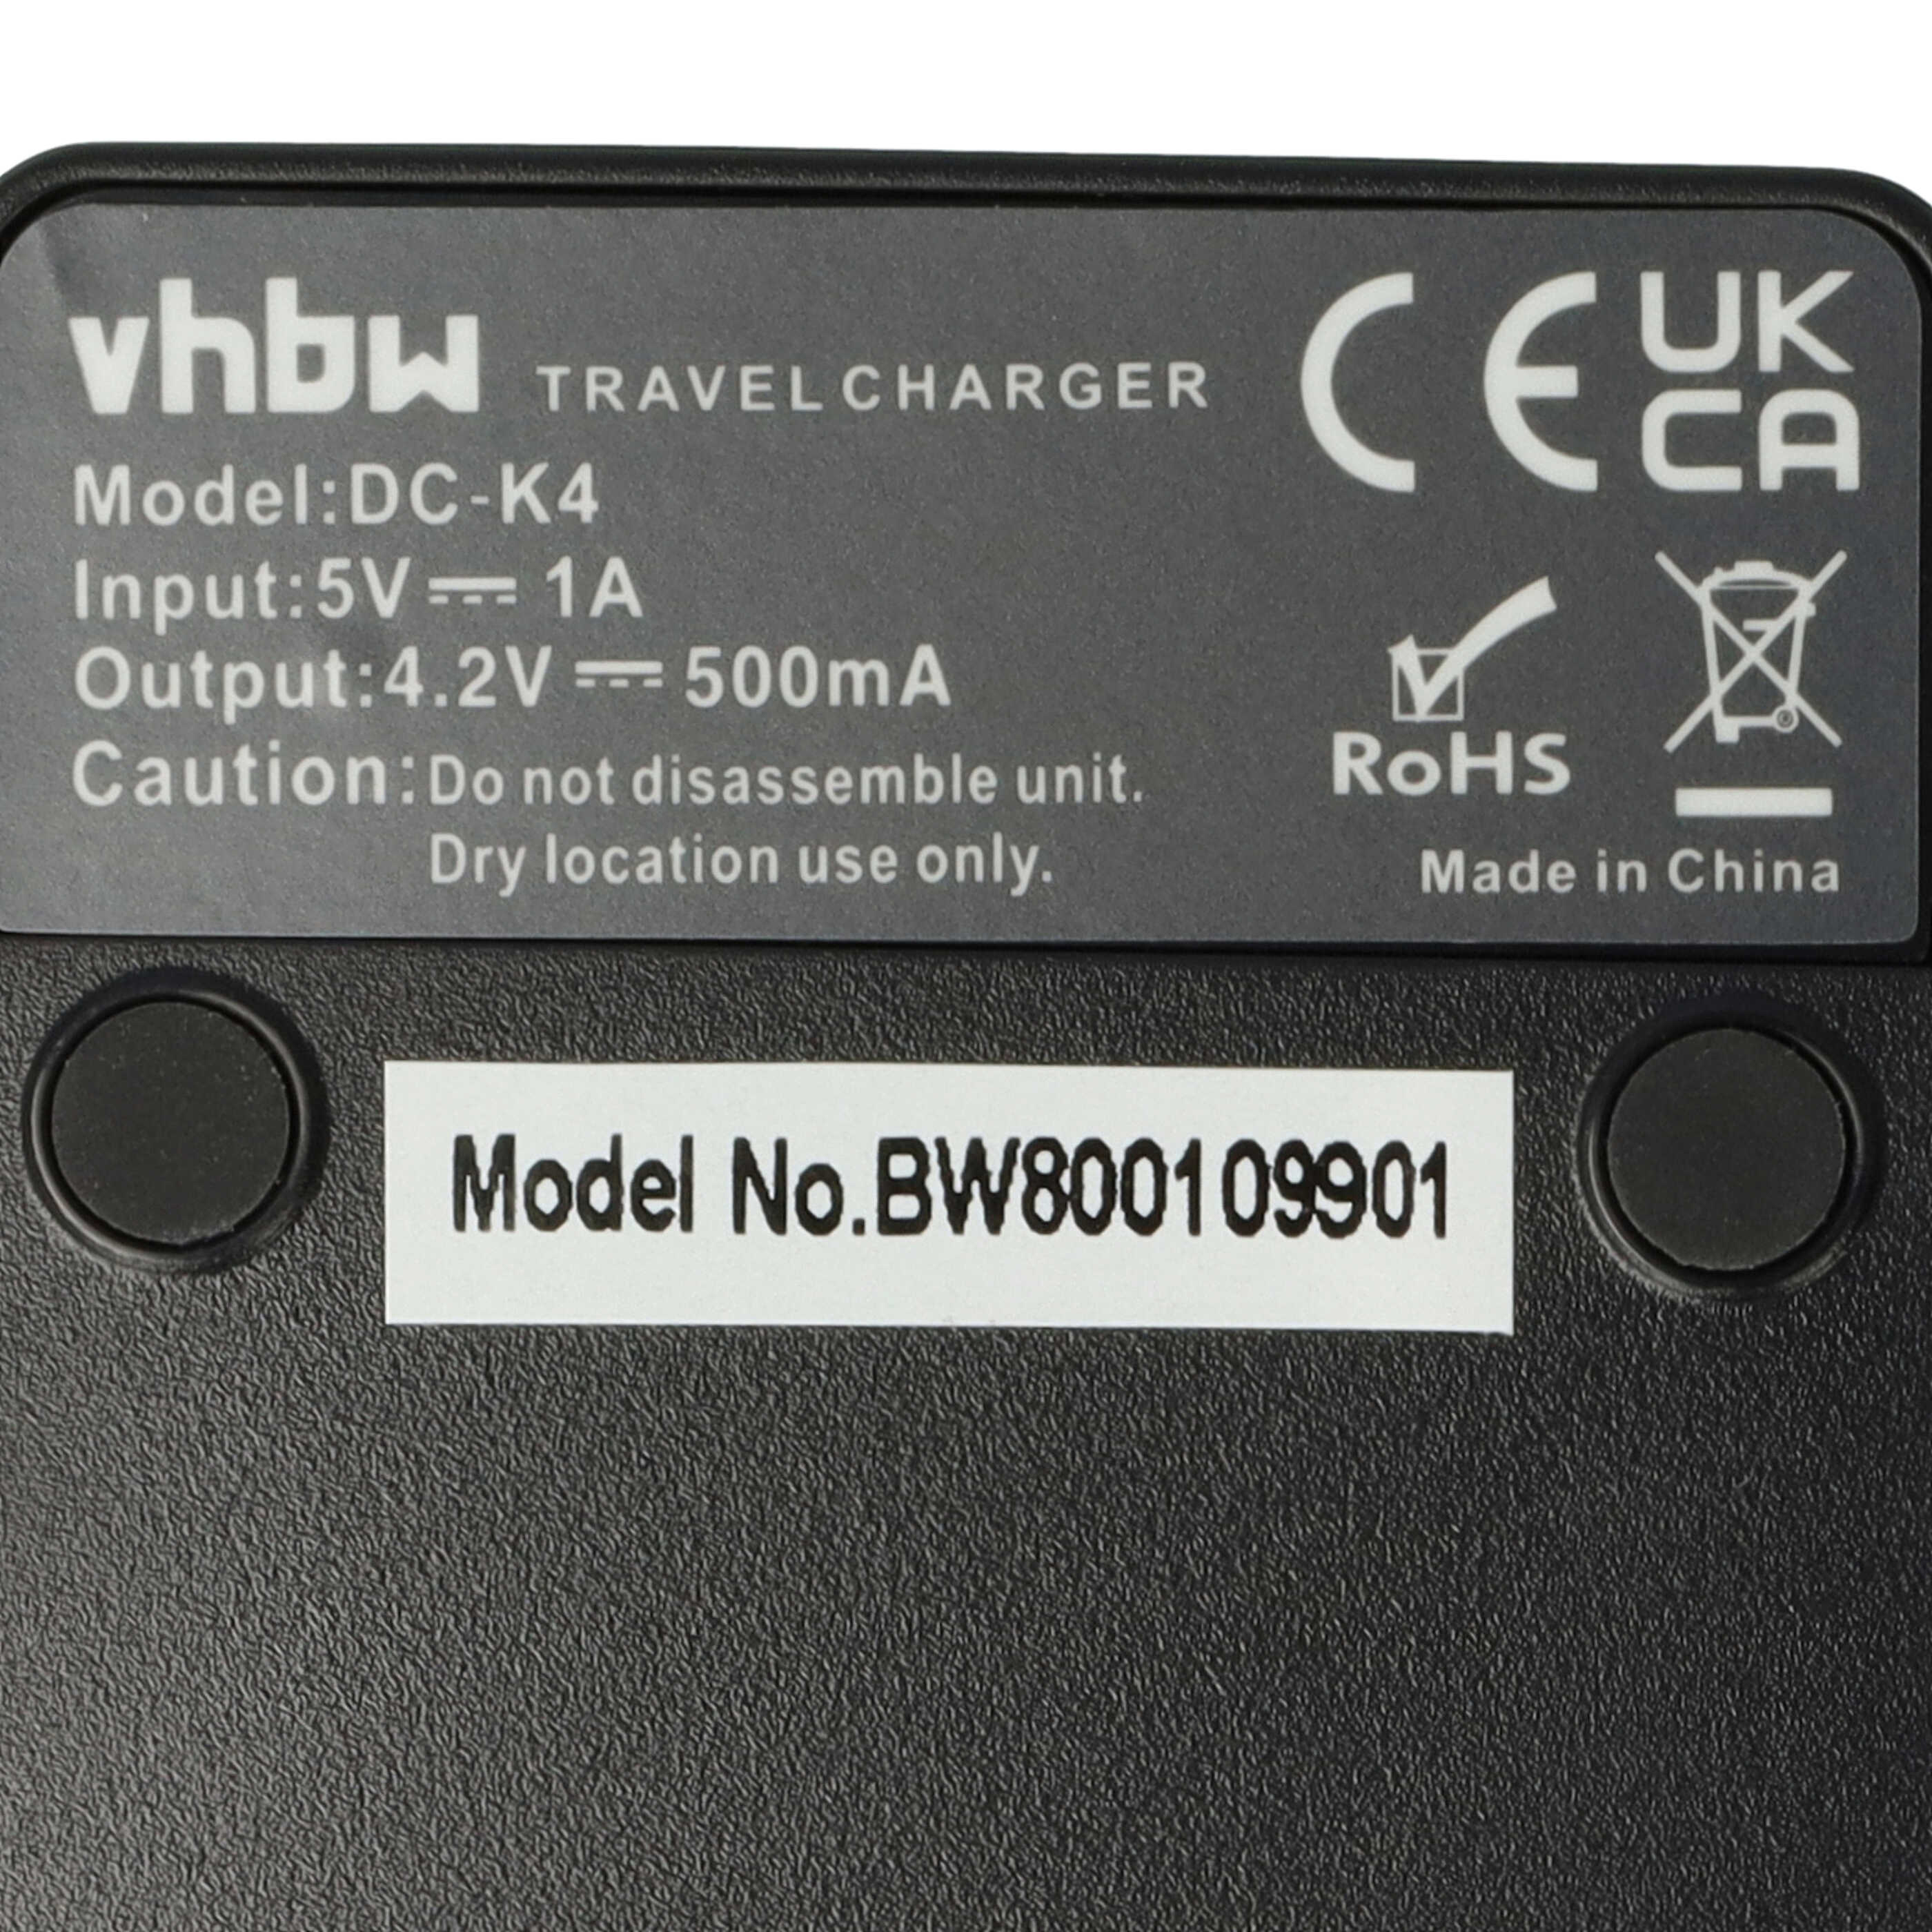 Battery Charger suitable for Canon NB-4L Camera etc. - 0.5 A, 4.2 V